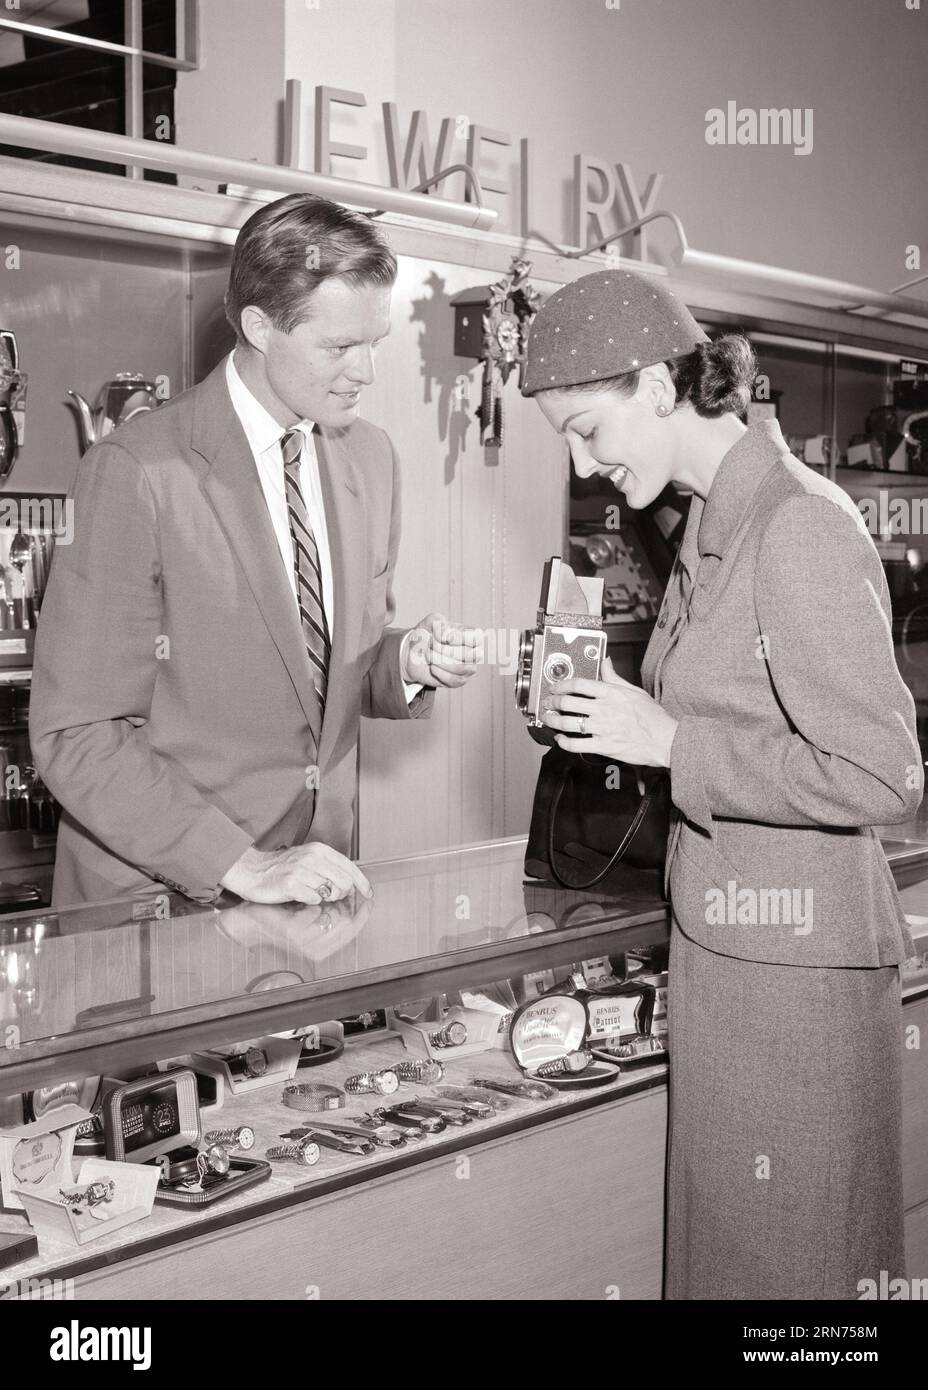 1950s STYLISH WOMAN SHOPPING AT GIFT COUNTER TALKING TO SALESMAN AS SHE HOLDS A TWIN LENS REFLEX CAMERA AS POSSIBLE PURCHASE - s7001 HAR001 HARS MALES GIFTS B&W LENS SKILL SUIT AND TIE ACTIVITY AMUSEMENT SELLING HAPPINESS WATCHES HOBBY CUSTOMER SERVICE INTEREST HOBBIES KNOWLEDGE PASTIME SHE INNOVATION PLEASURE OPPORTUNITY OCCUPATIONS PURCHASE STYLISH REFLEX HOLDS MID-ADULT MID-ADULT MAN MID-ADULT WOMAN POSSIBLE RELAXATION SALESMEN YOUNG ADULT MAN YOUNG ADULT WOMAN AMATEUR BLACK AND WHITE CAUCASIAN ETHNICITY ENJOYMENT HAR001 OLD FASHIONED Stock Photo